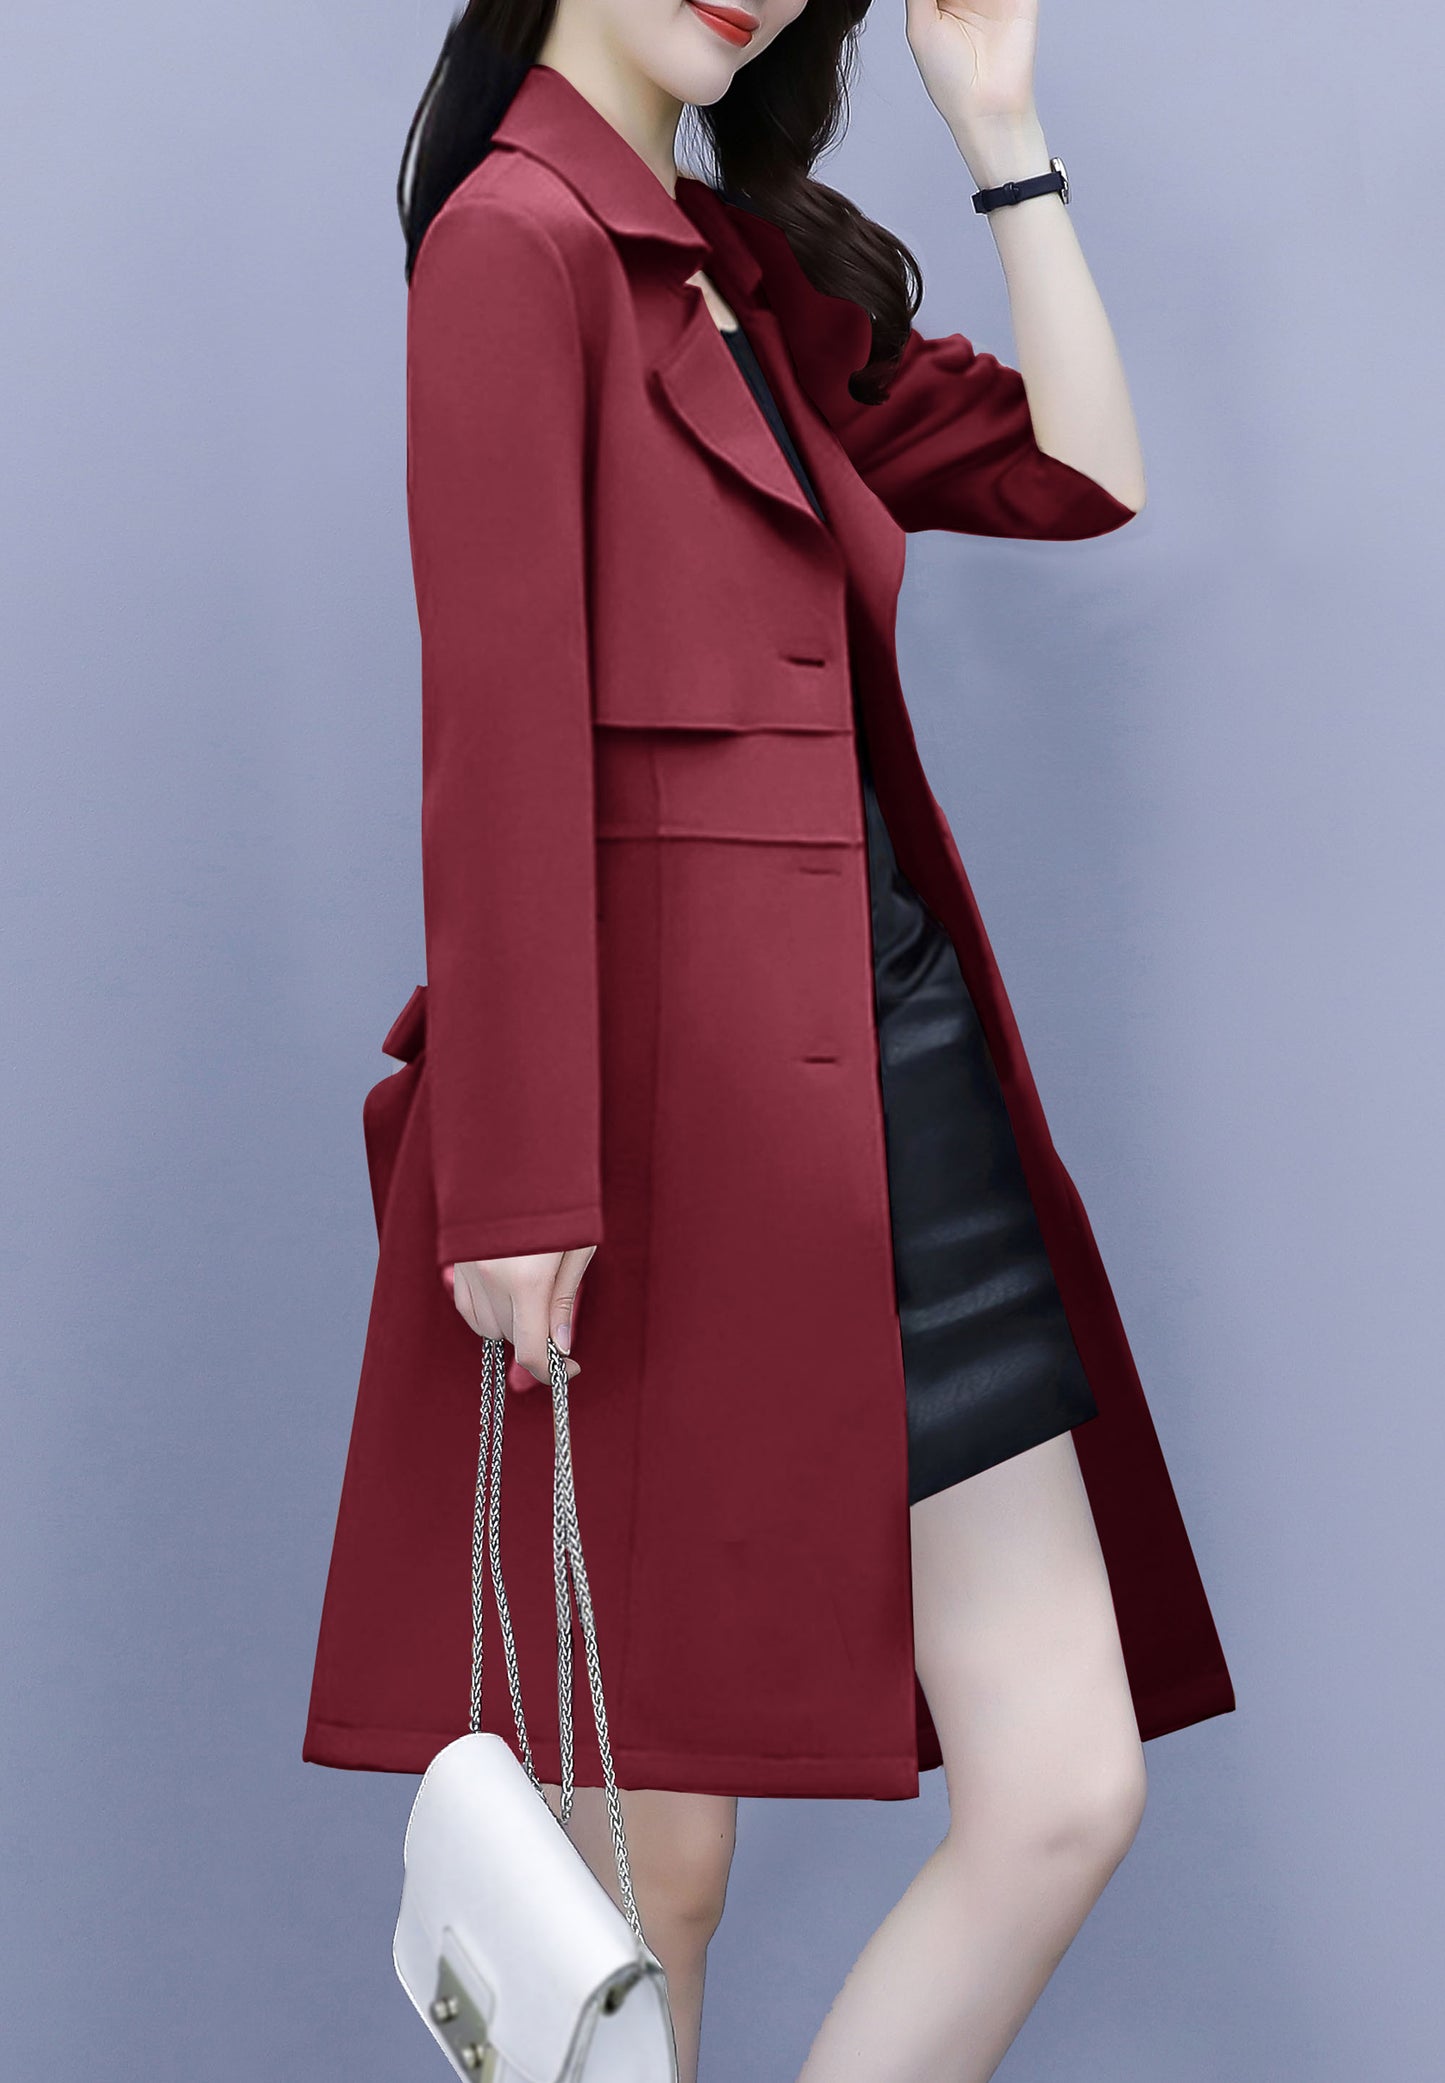 Red 3/4 Length Button up Outerwear Trench Coat with Belt